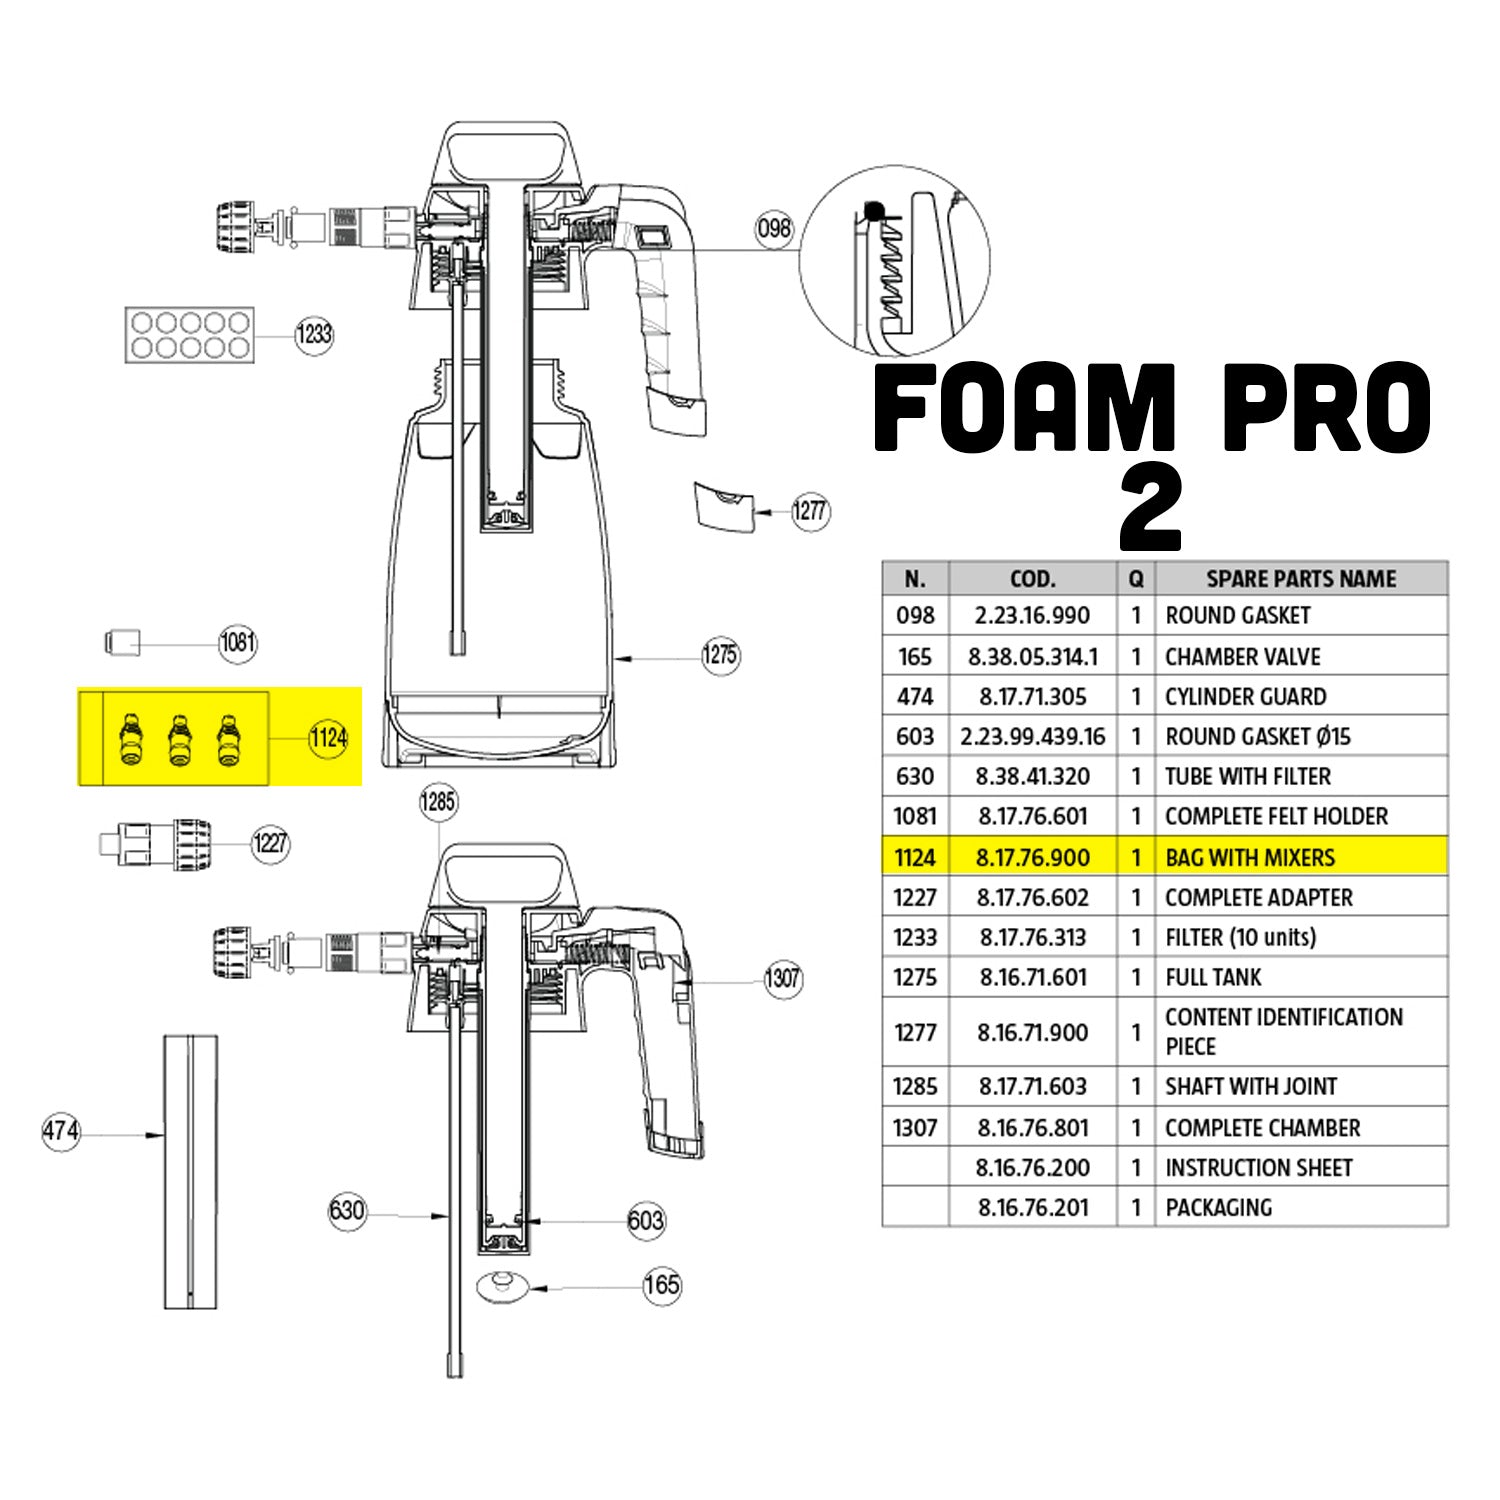 1124-bag-of-mixers-part-guide